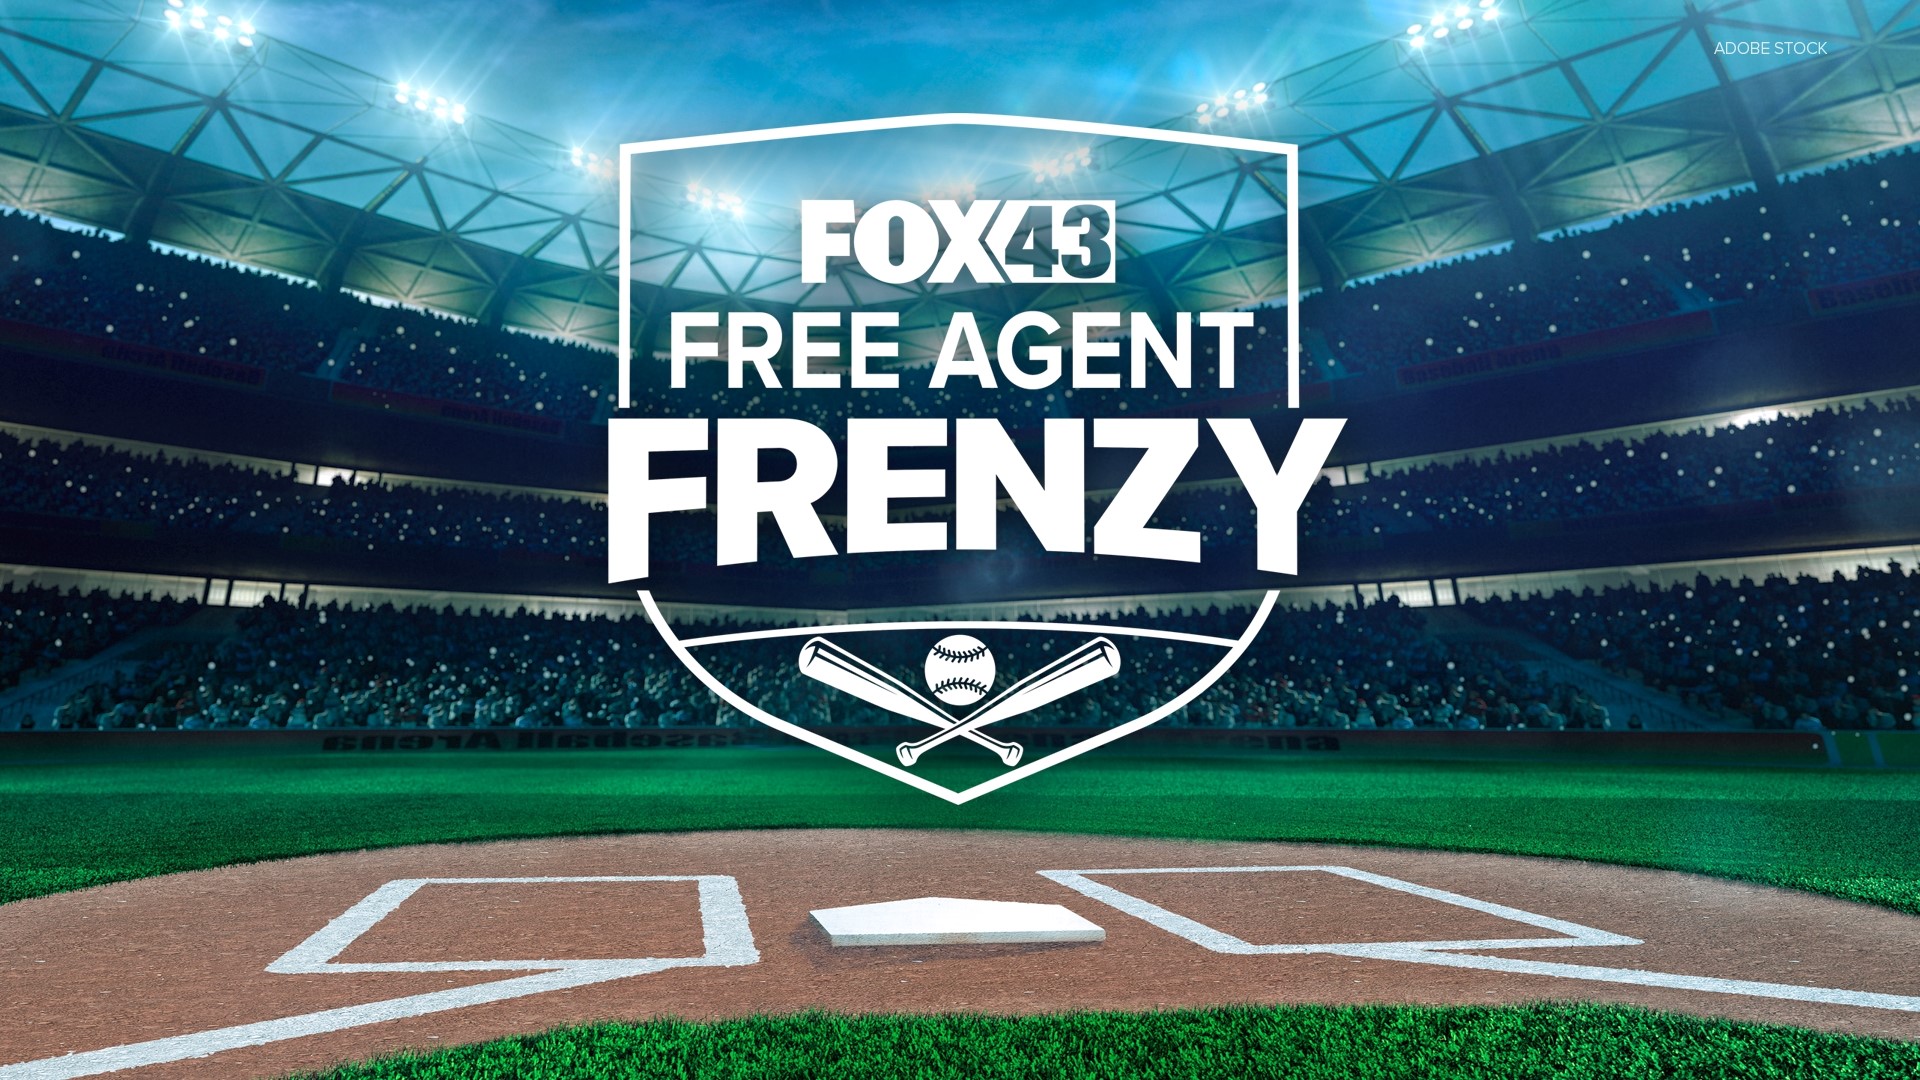 Here is our FOX43 Sports entry to the MLBTradeRumors Top 50 Free Agent Prediction List contest.